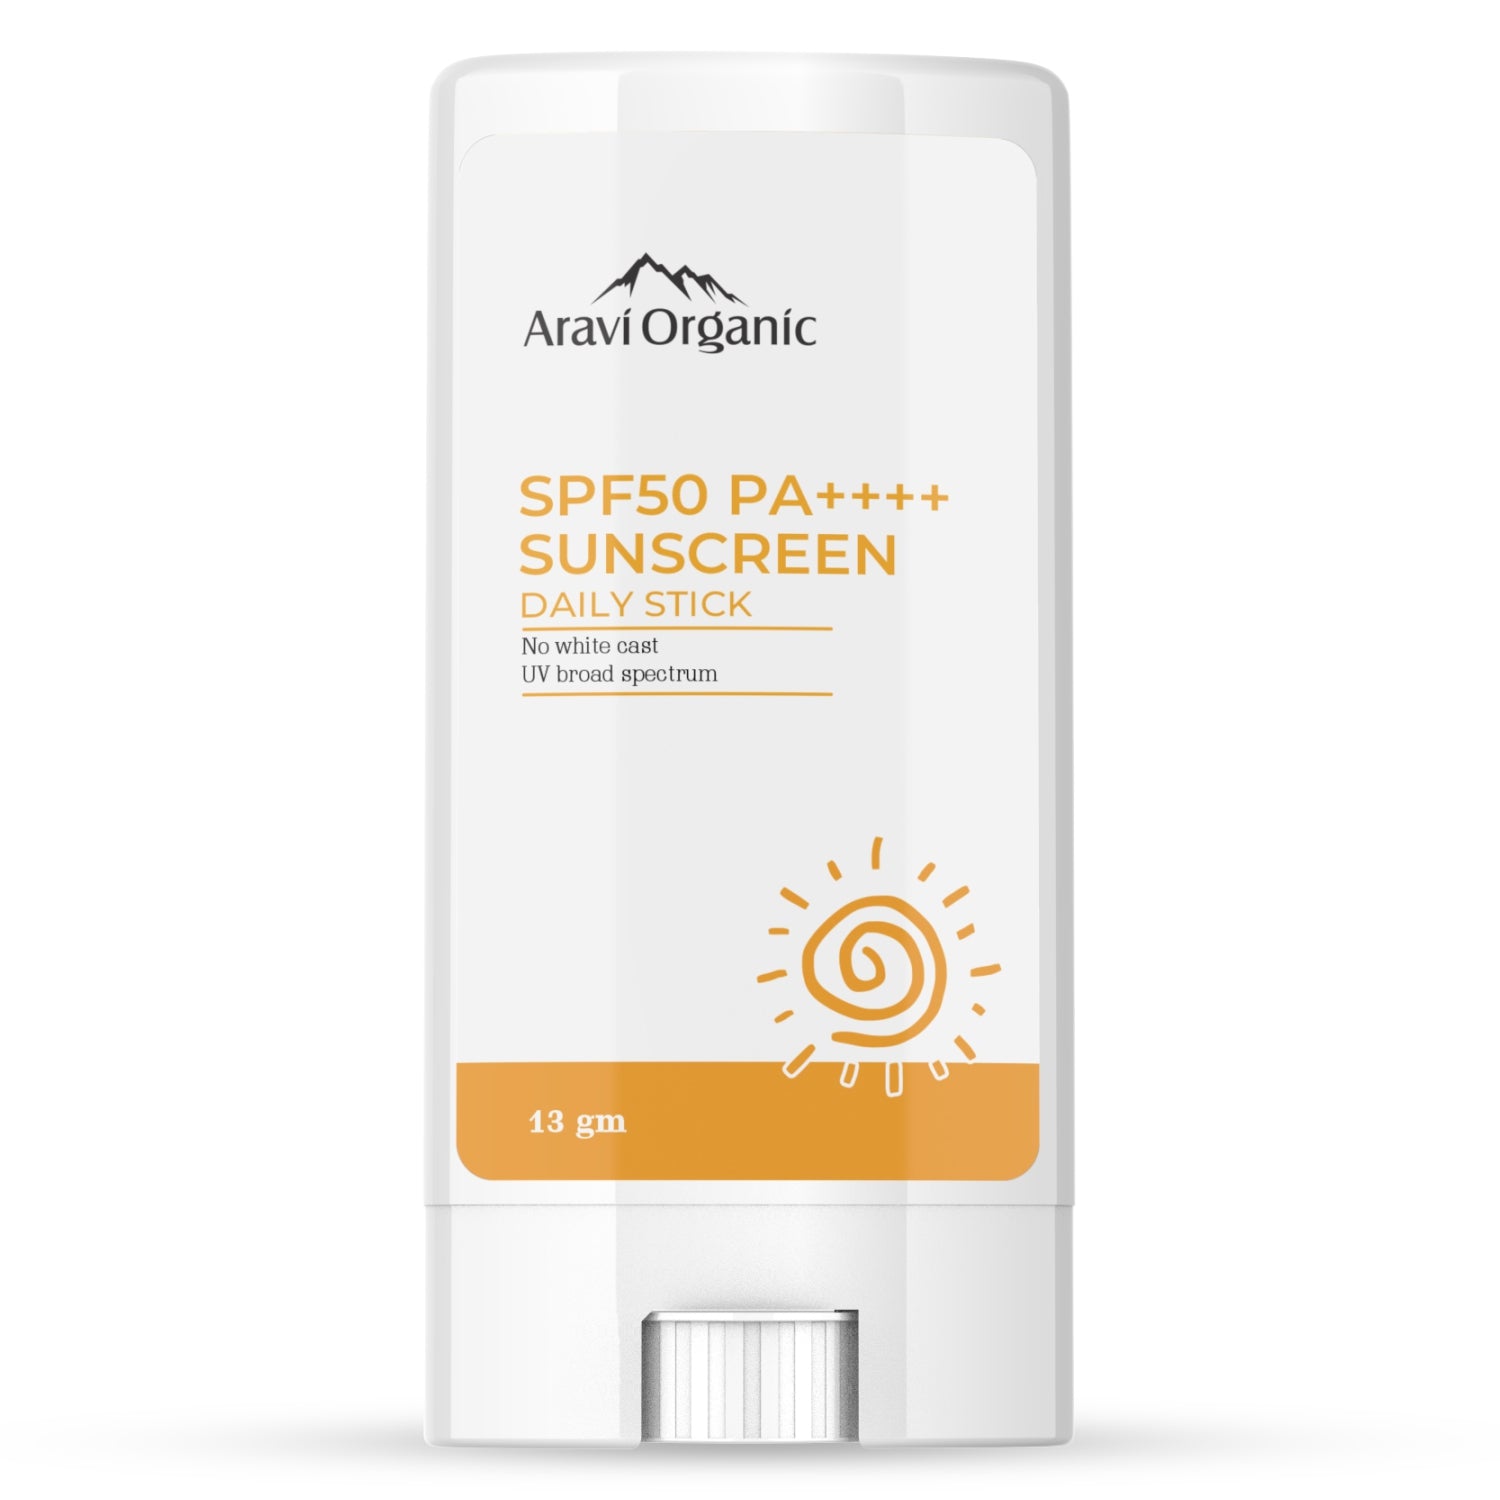 Aravi Organic SPF 50+ Daily Sunscreen Stick Lightweight, Non-Greasy For All Skin Types